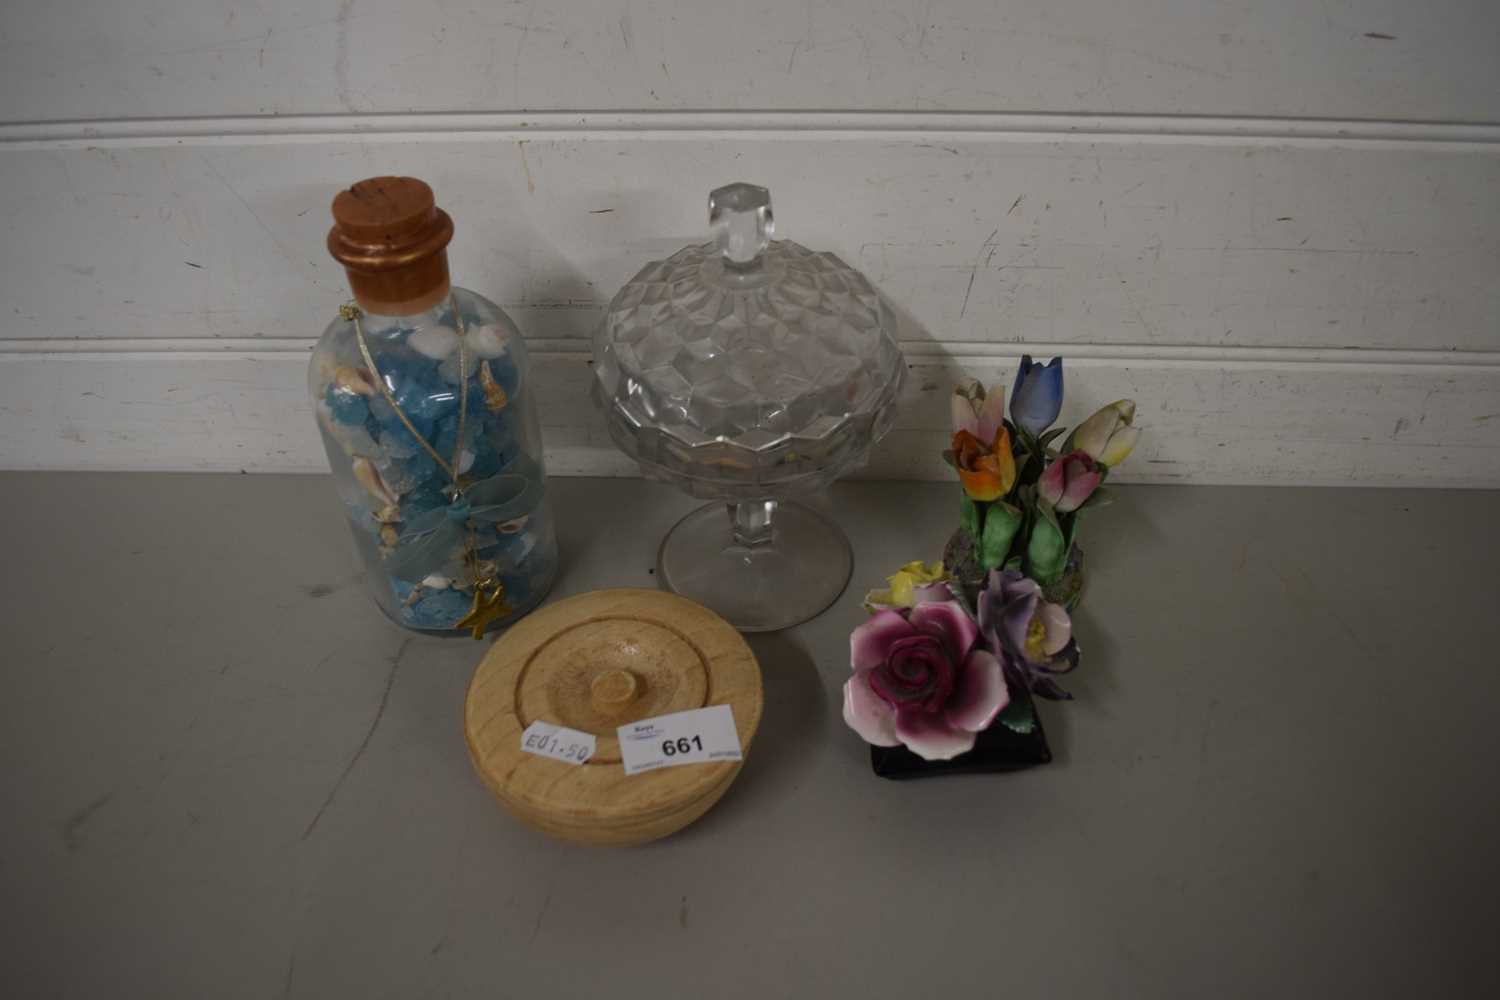 MIXED LOT OF WARES TO INCLUDE CROWN STAFFORDSHIRE MODEL FLOWERS, TURNED WOODEN BOX AND OTHER ITEMS